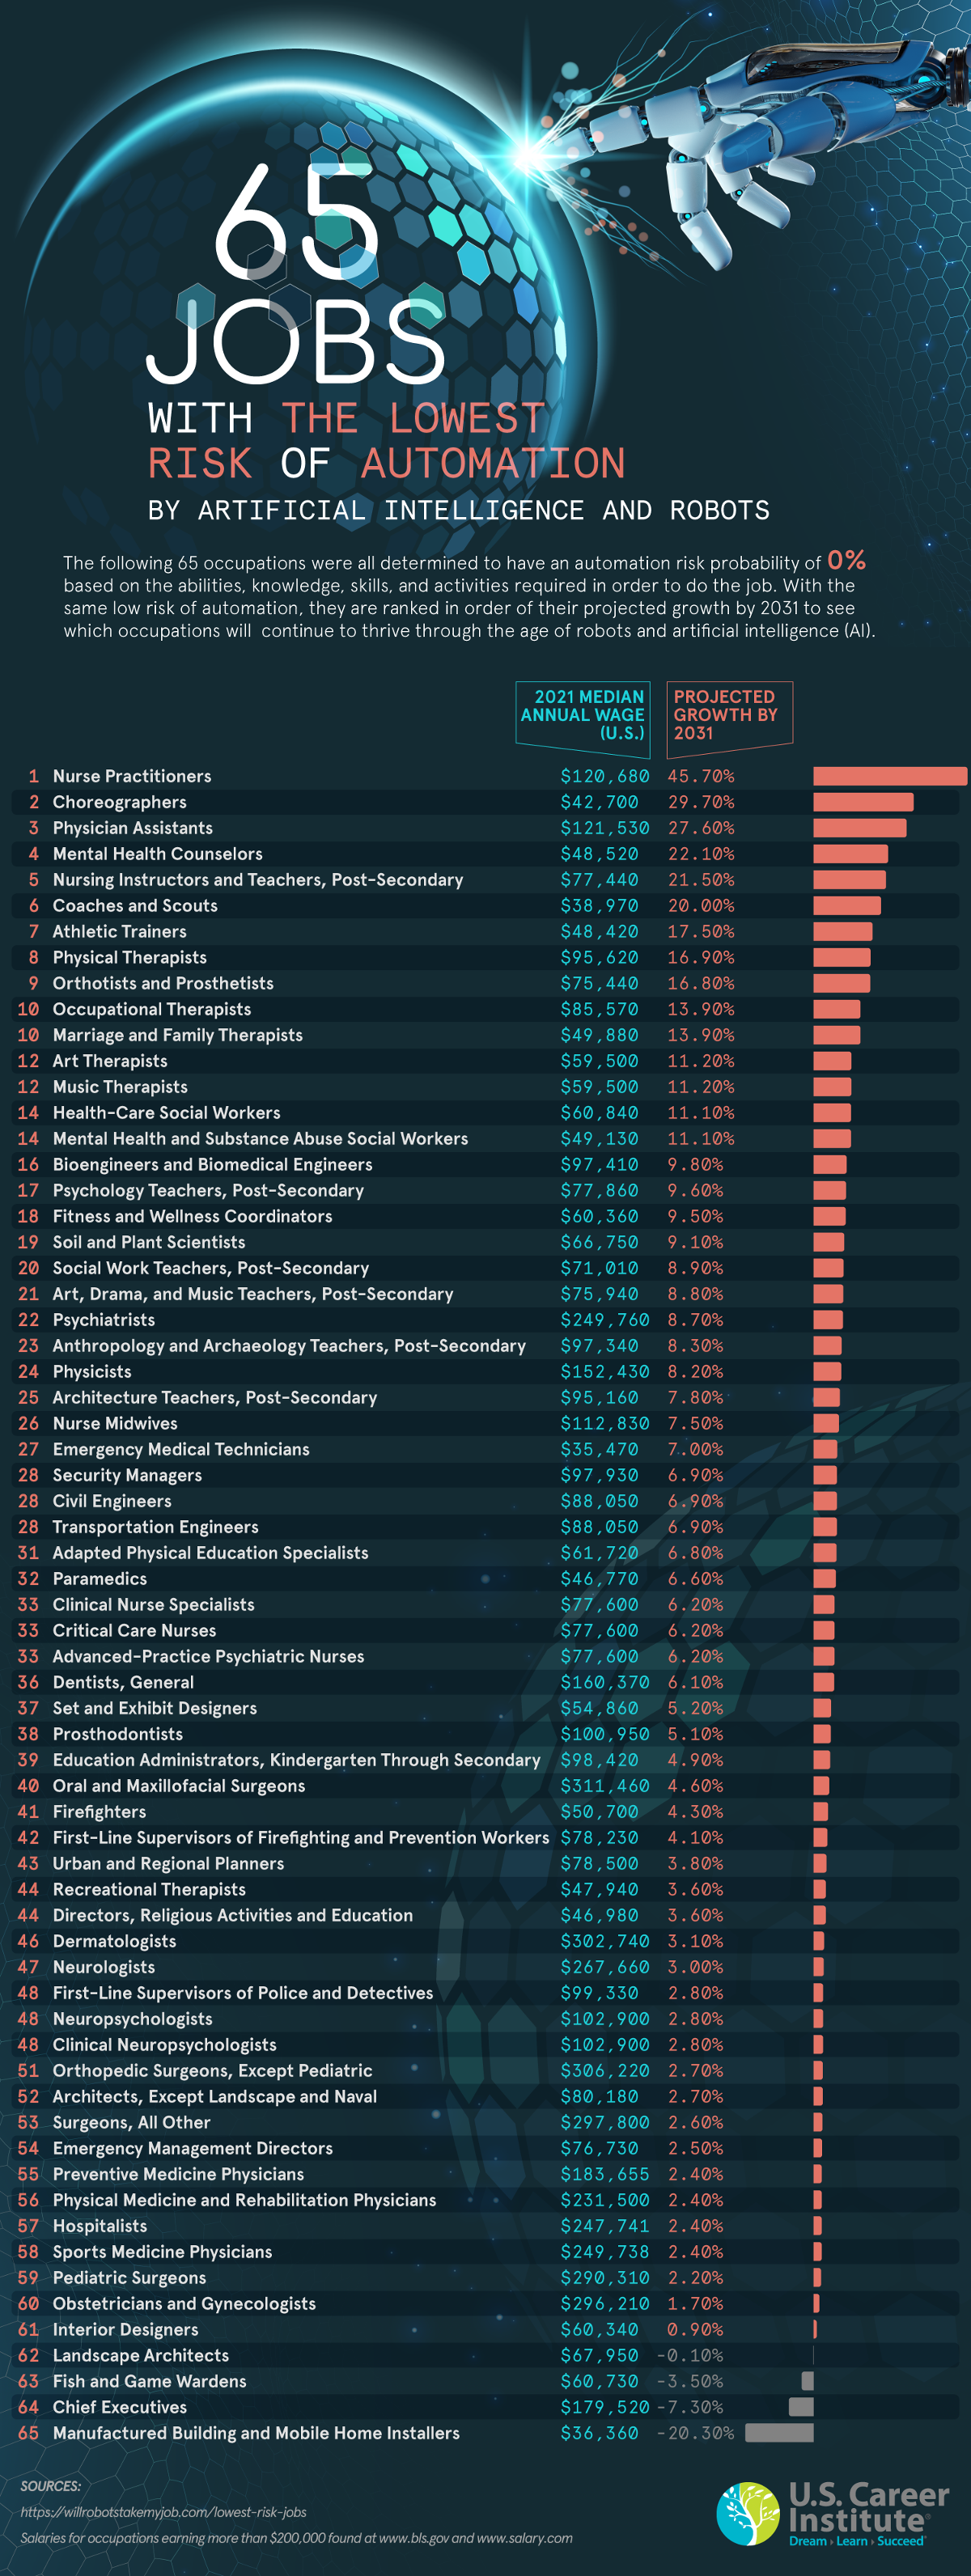 The 65 Jobs With the Lowest Risk of Automation by Artificial Intelligence and Robots - U.S. Career Institute Online Career Training School - Infographic